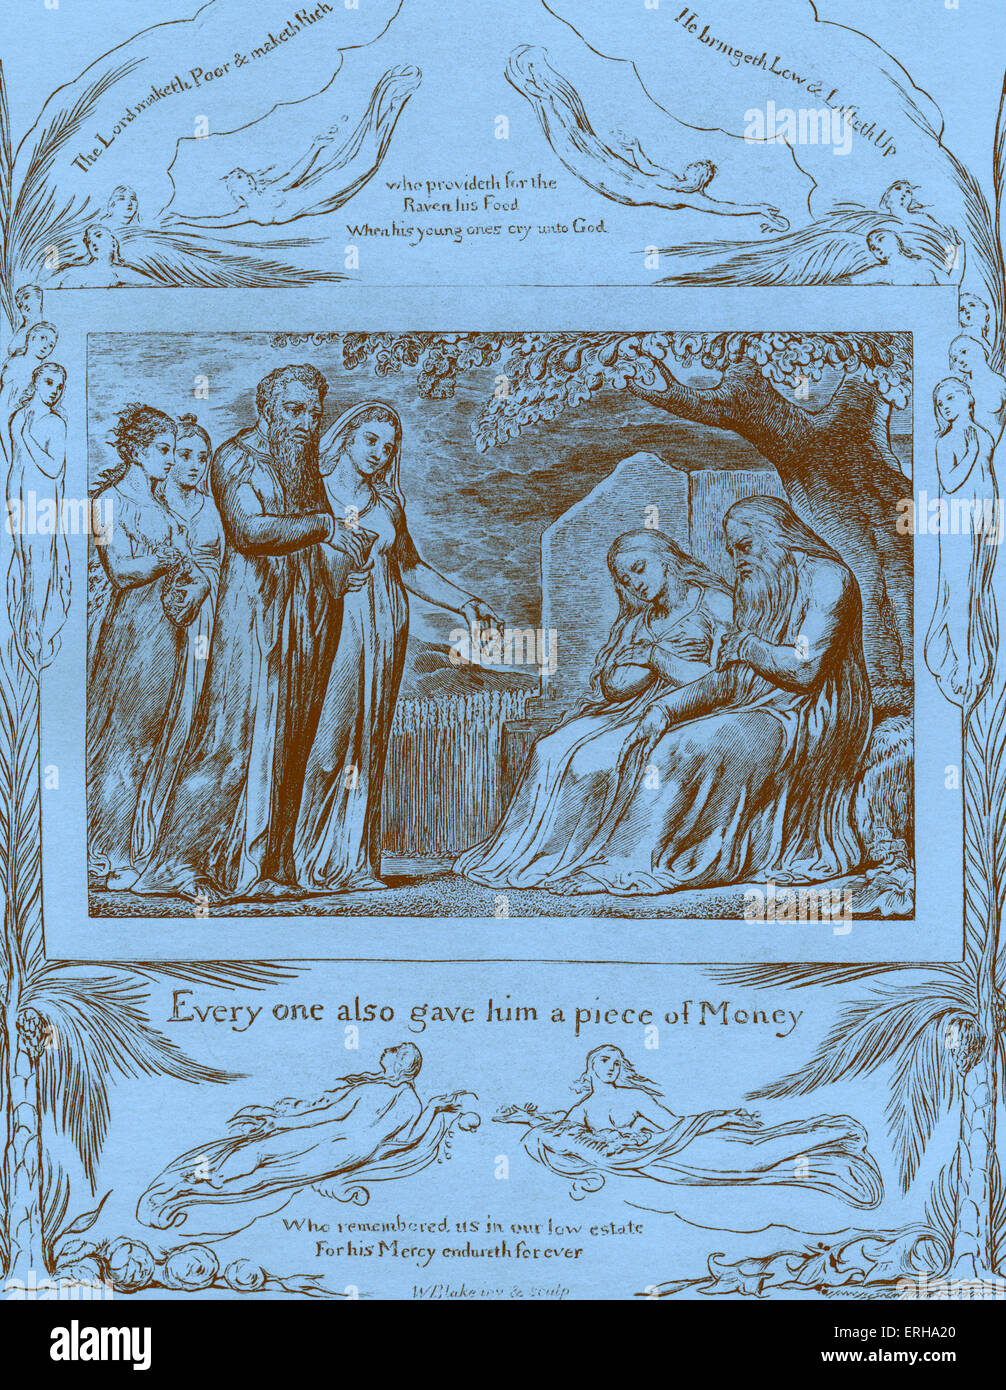 Job and his Wife Receiving Alms by William Blake, from the illustrations of the Book of Job, 1825. Captions read: 'The Lord Stock Photo